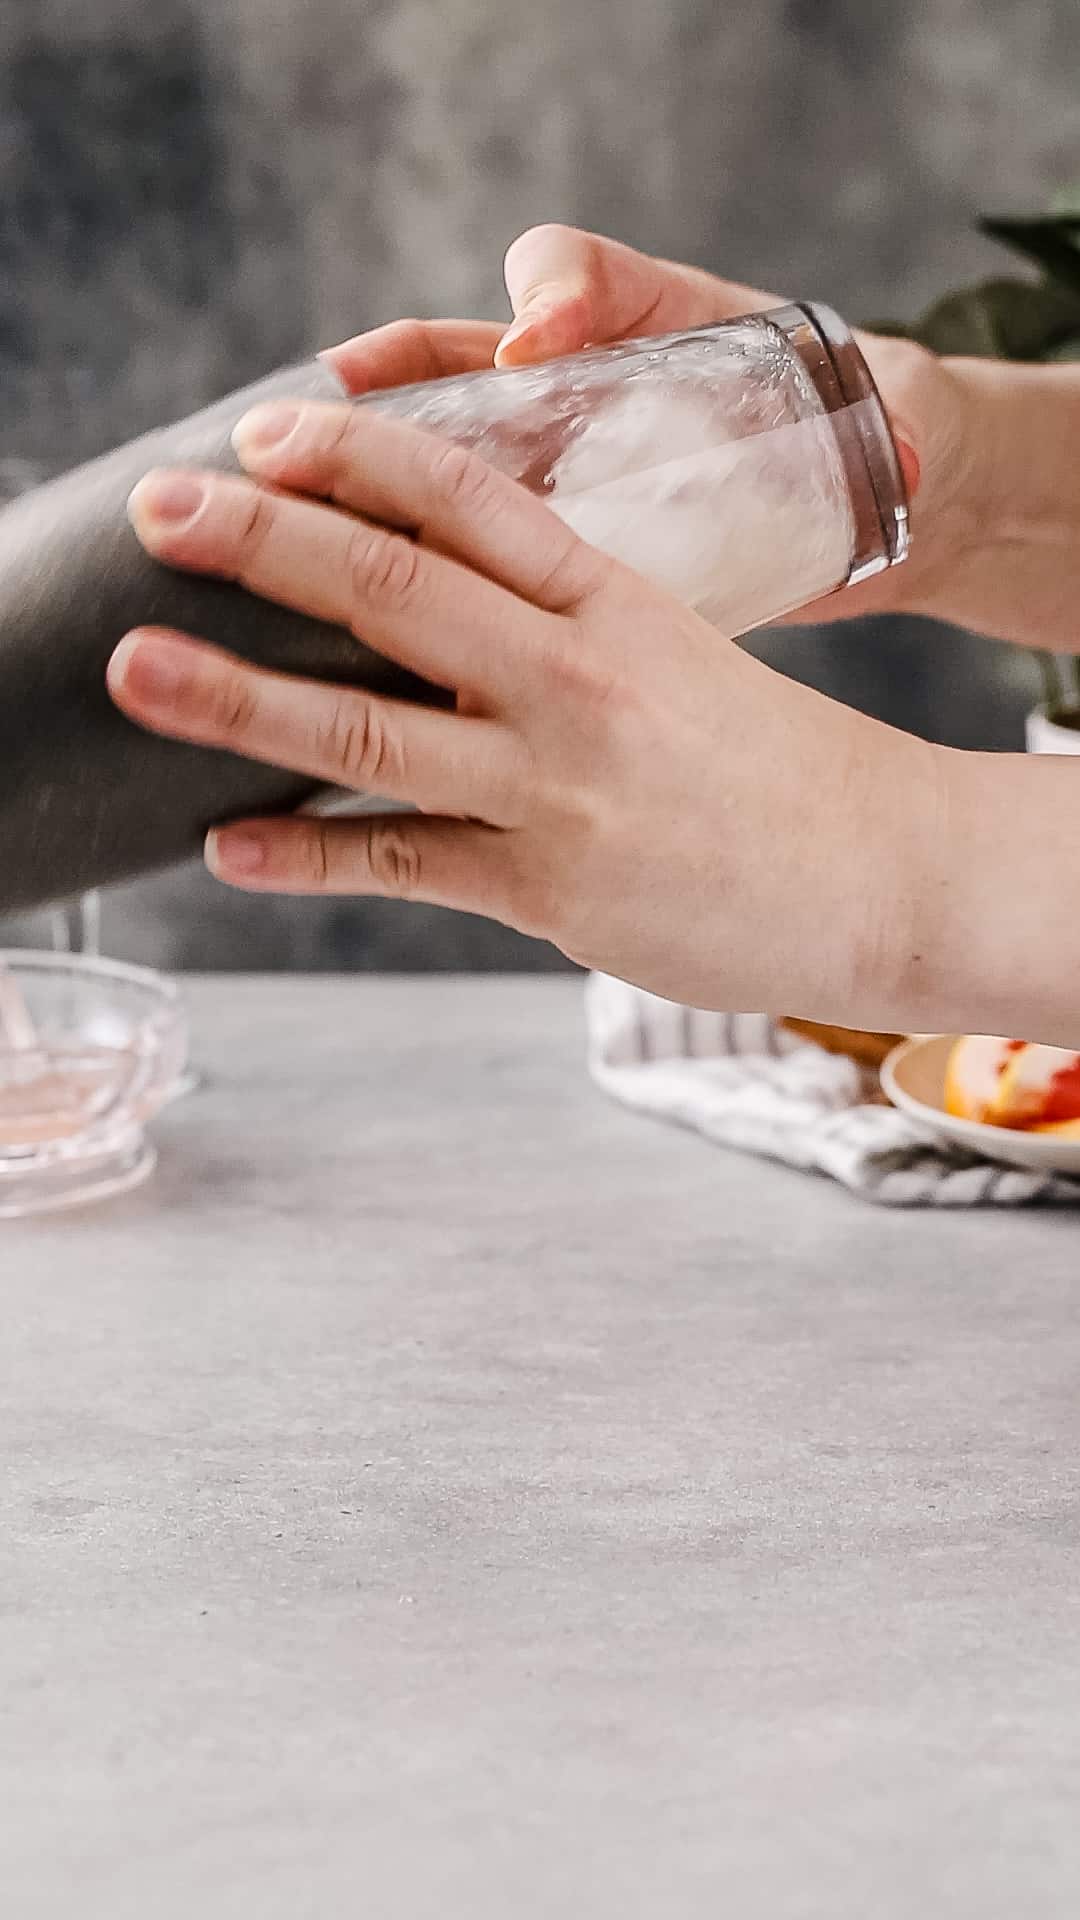 Hands shaking a gray metal and glass cocktail shaker filled with liquid and ice.